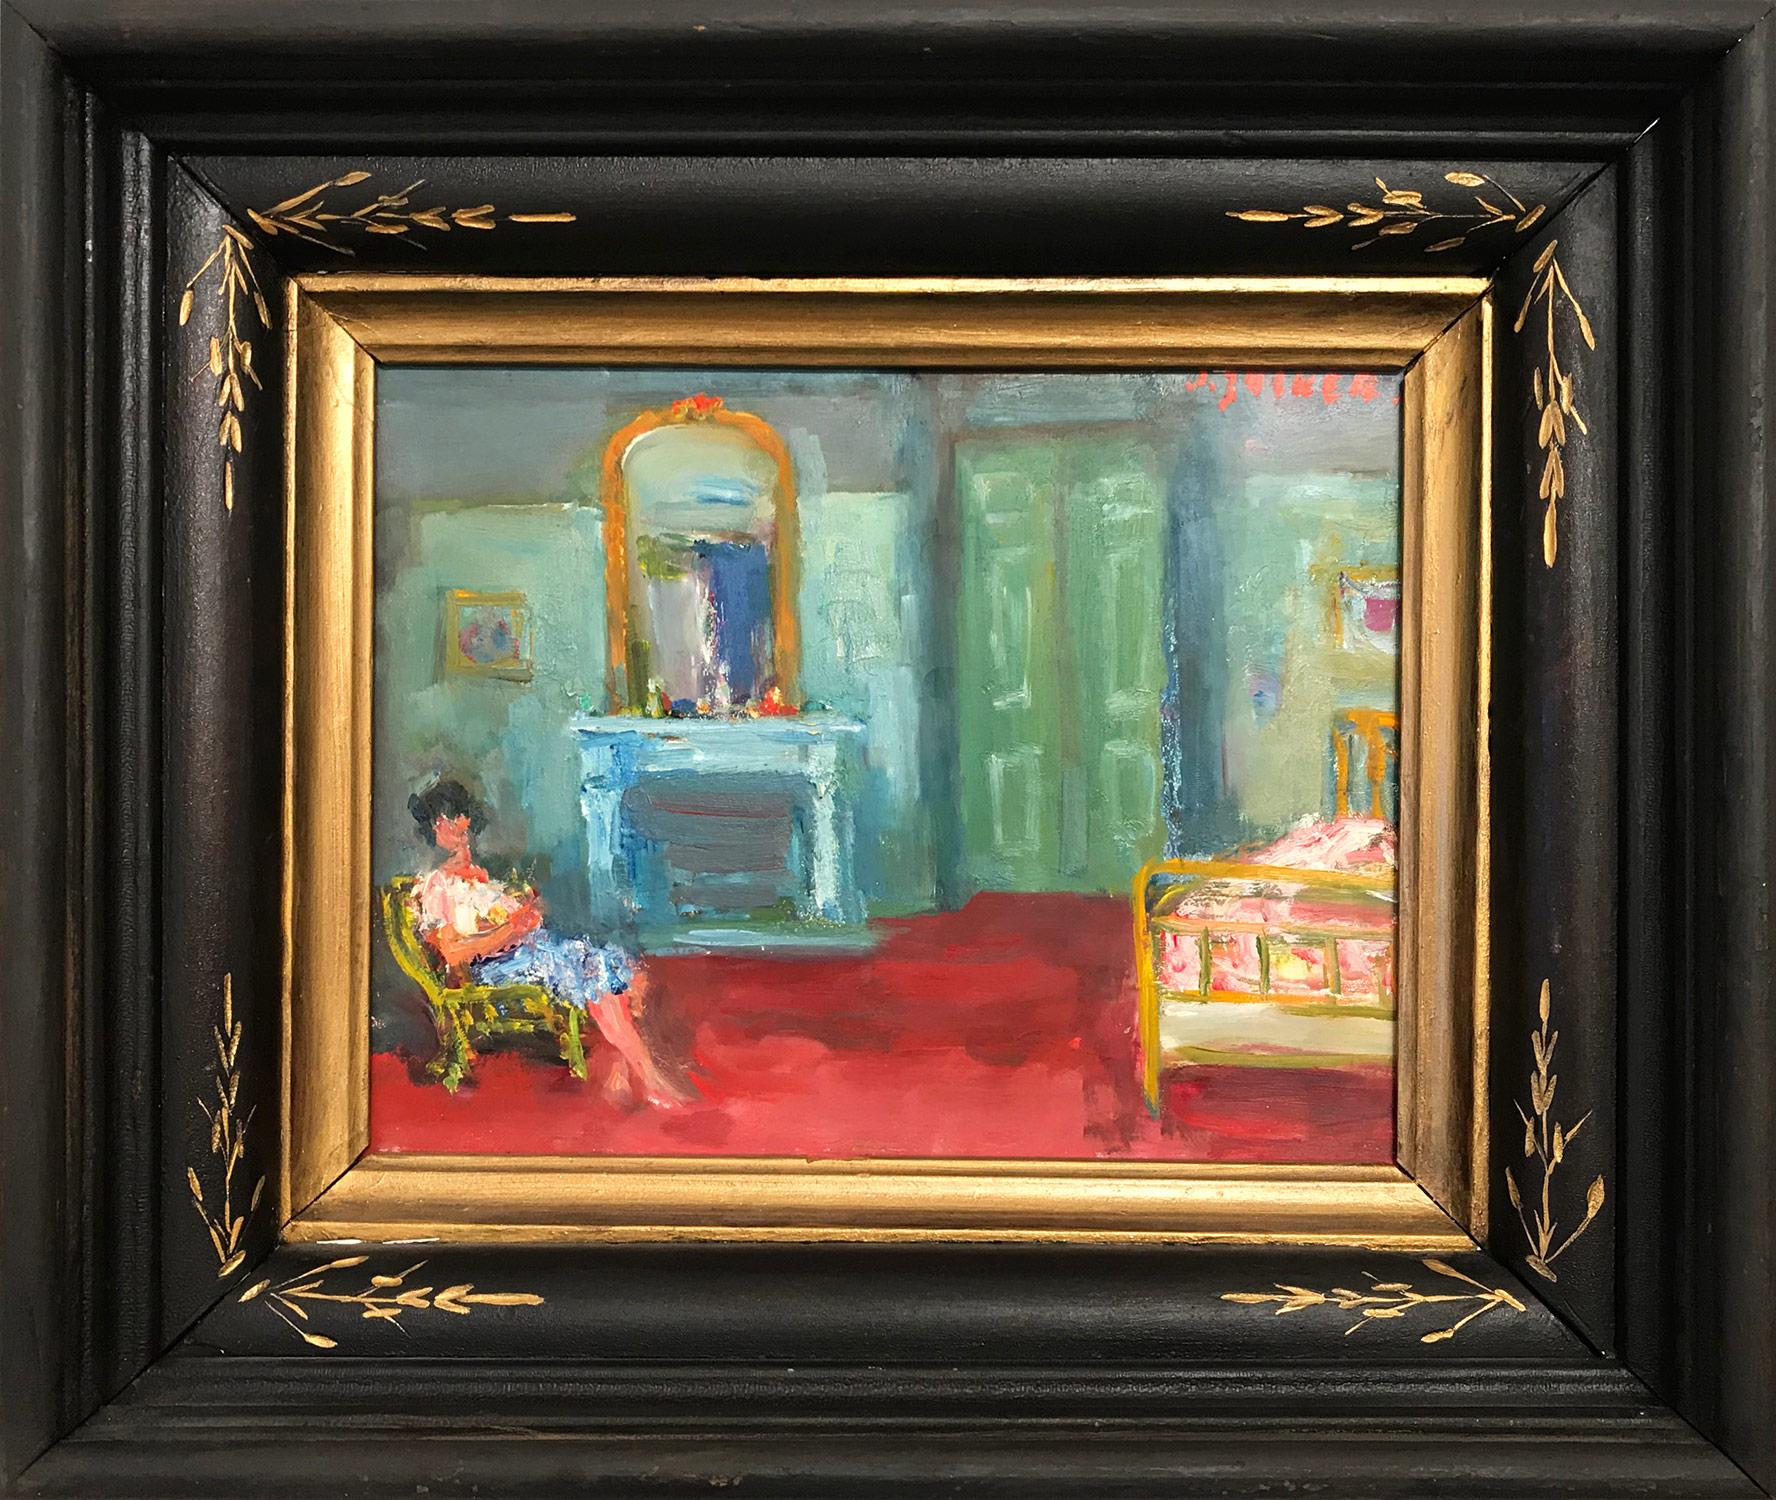 "Interior Scene with Figure and Mantel" Post-Impressionism Oil Painting on Panel